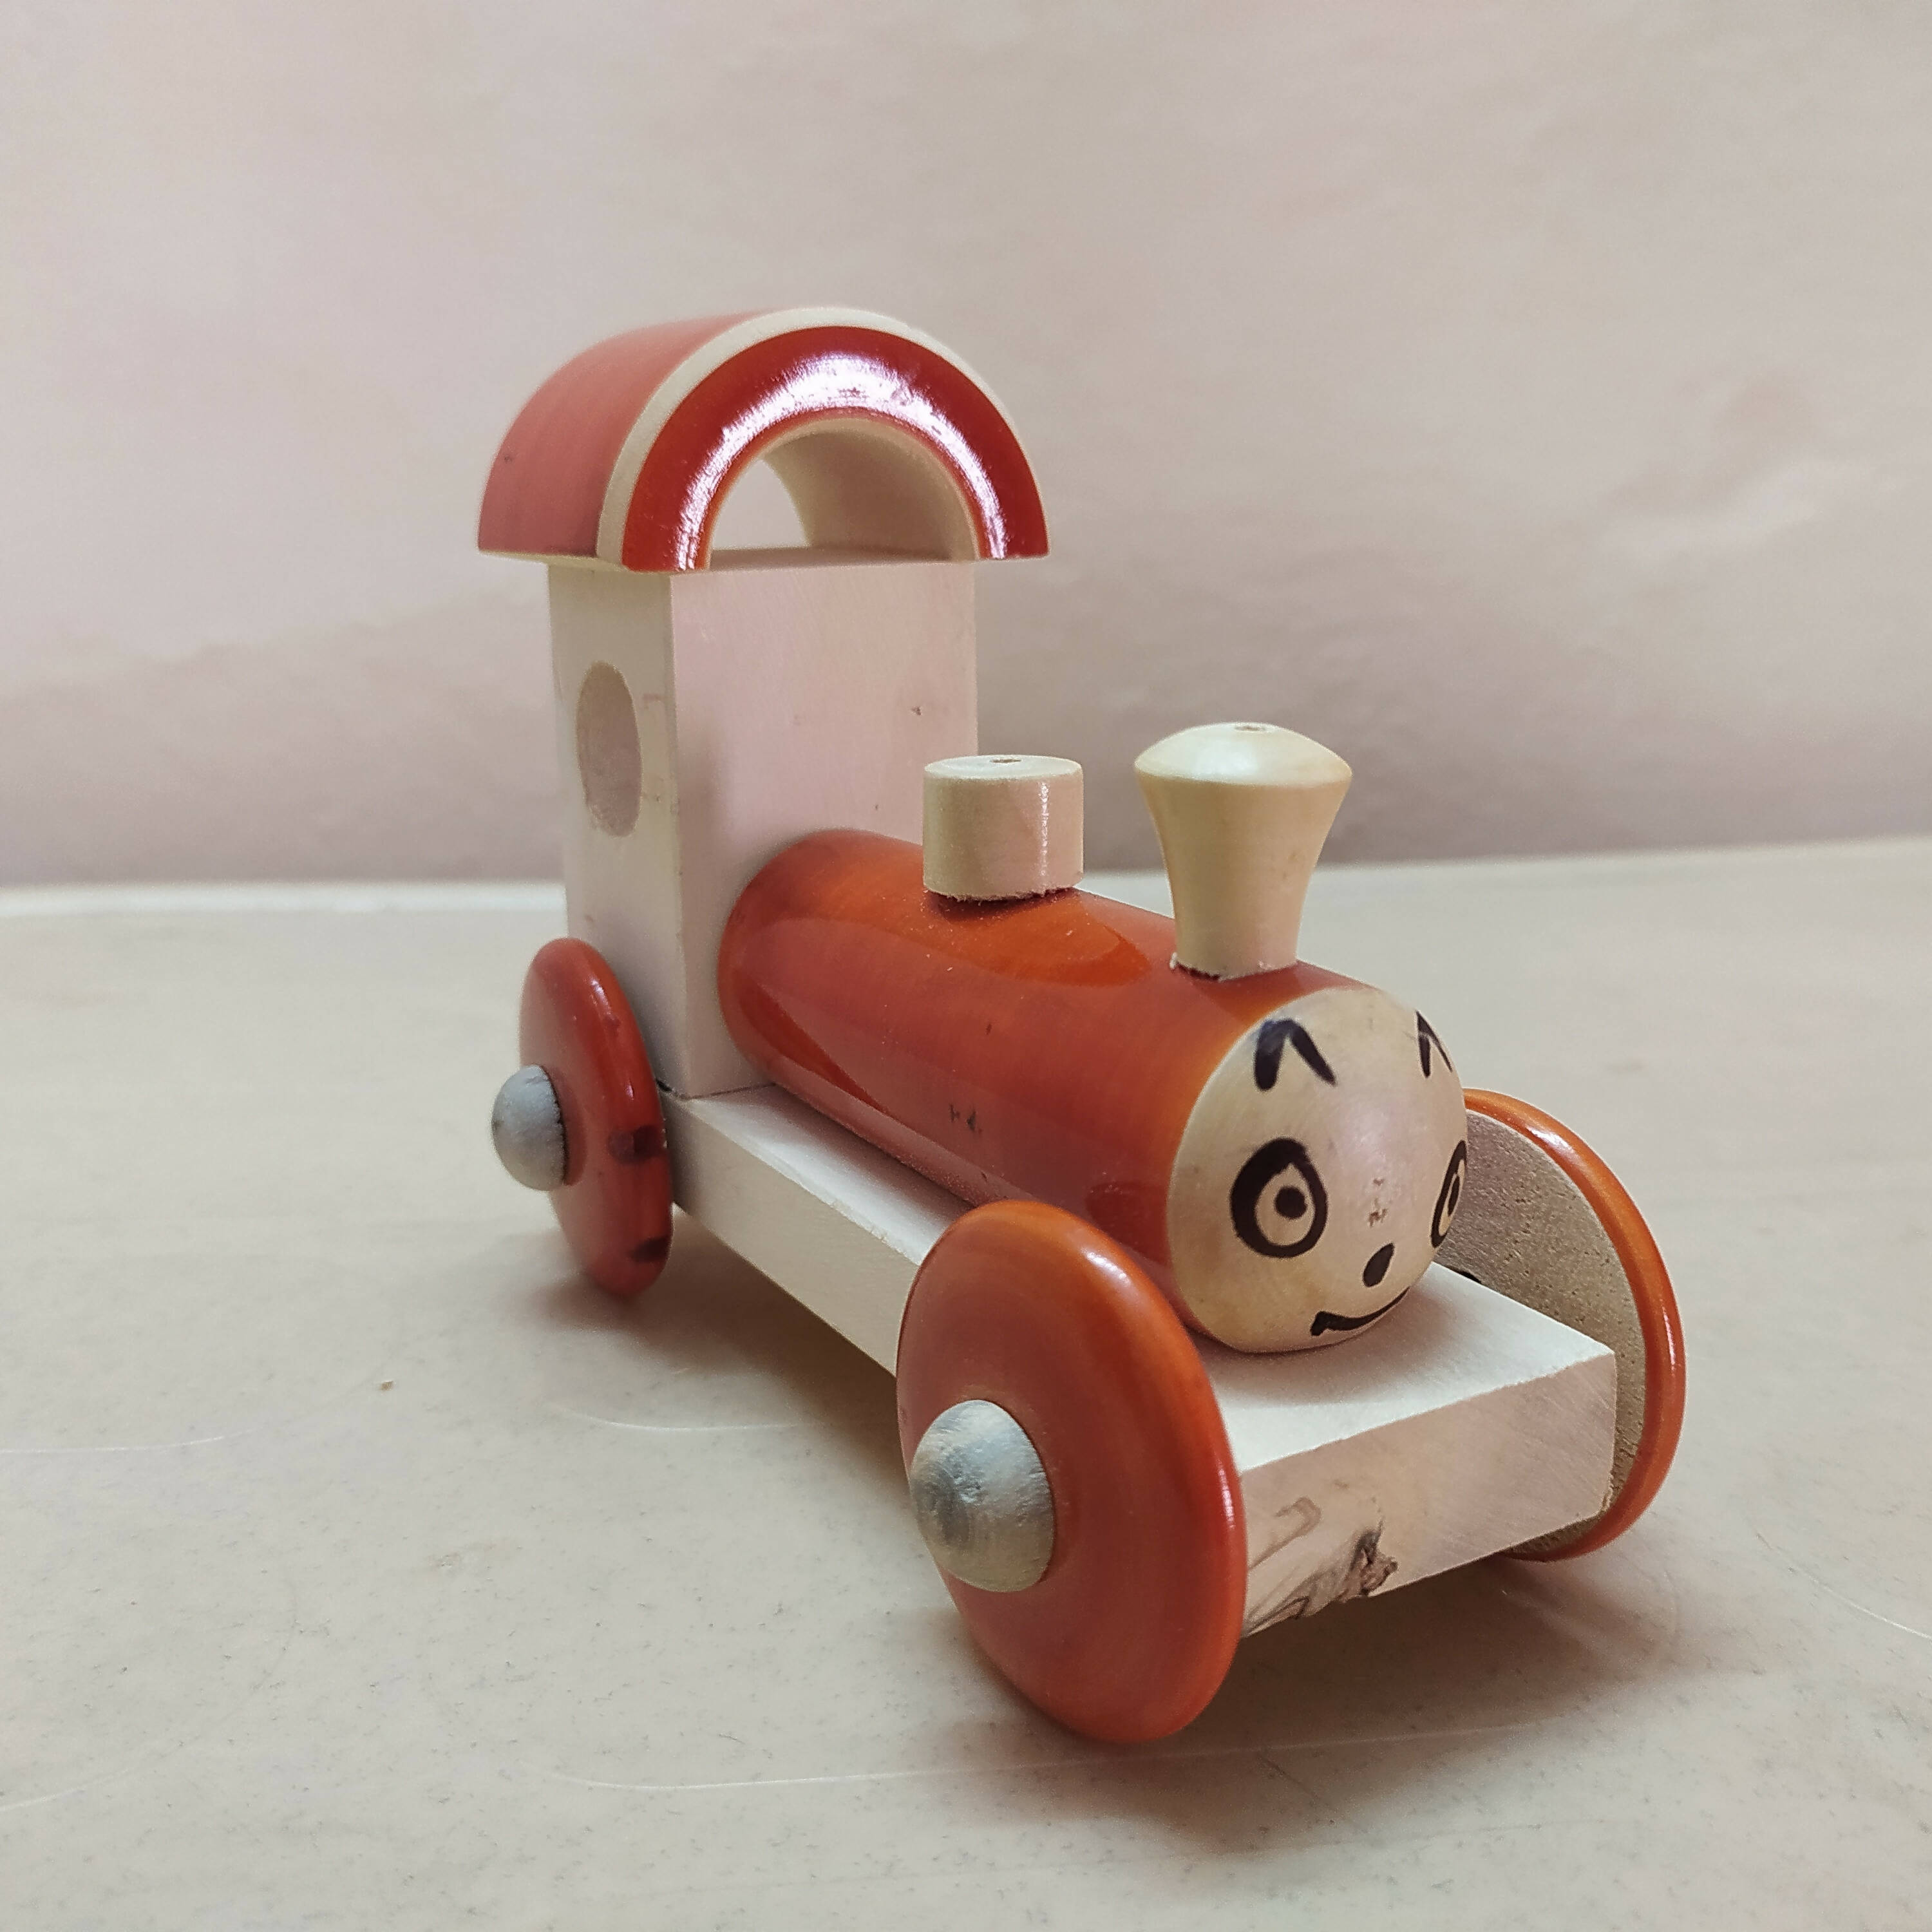 Wooden Train Engine Push/Pull Toy for 12+ Months Kids, Preschool Toys - Multicolor-All New (Pack of 1)